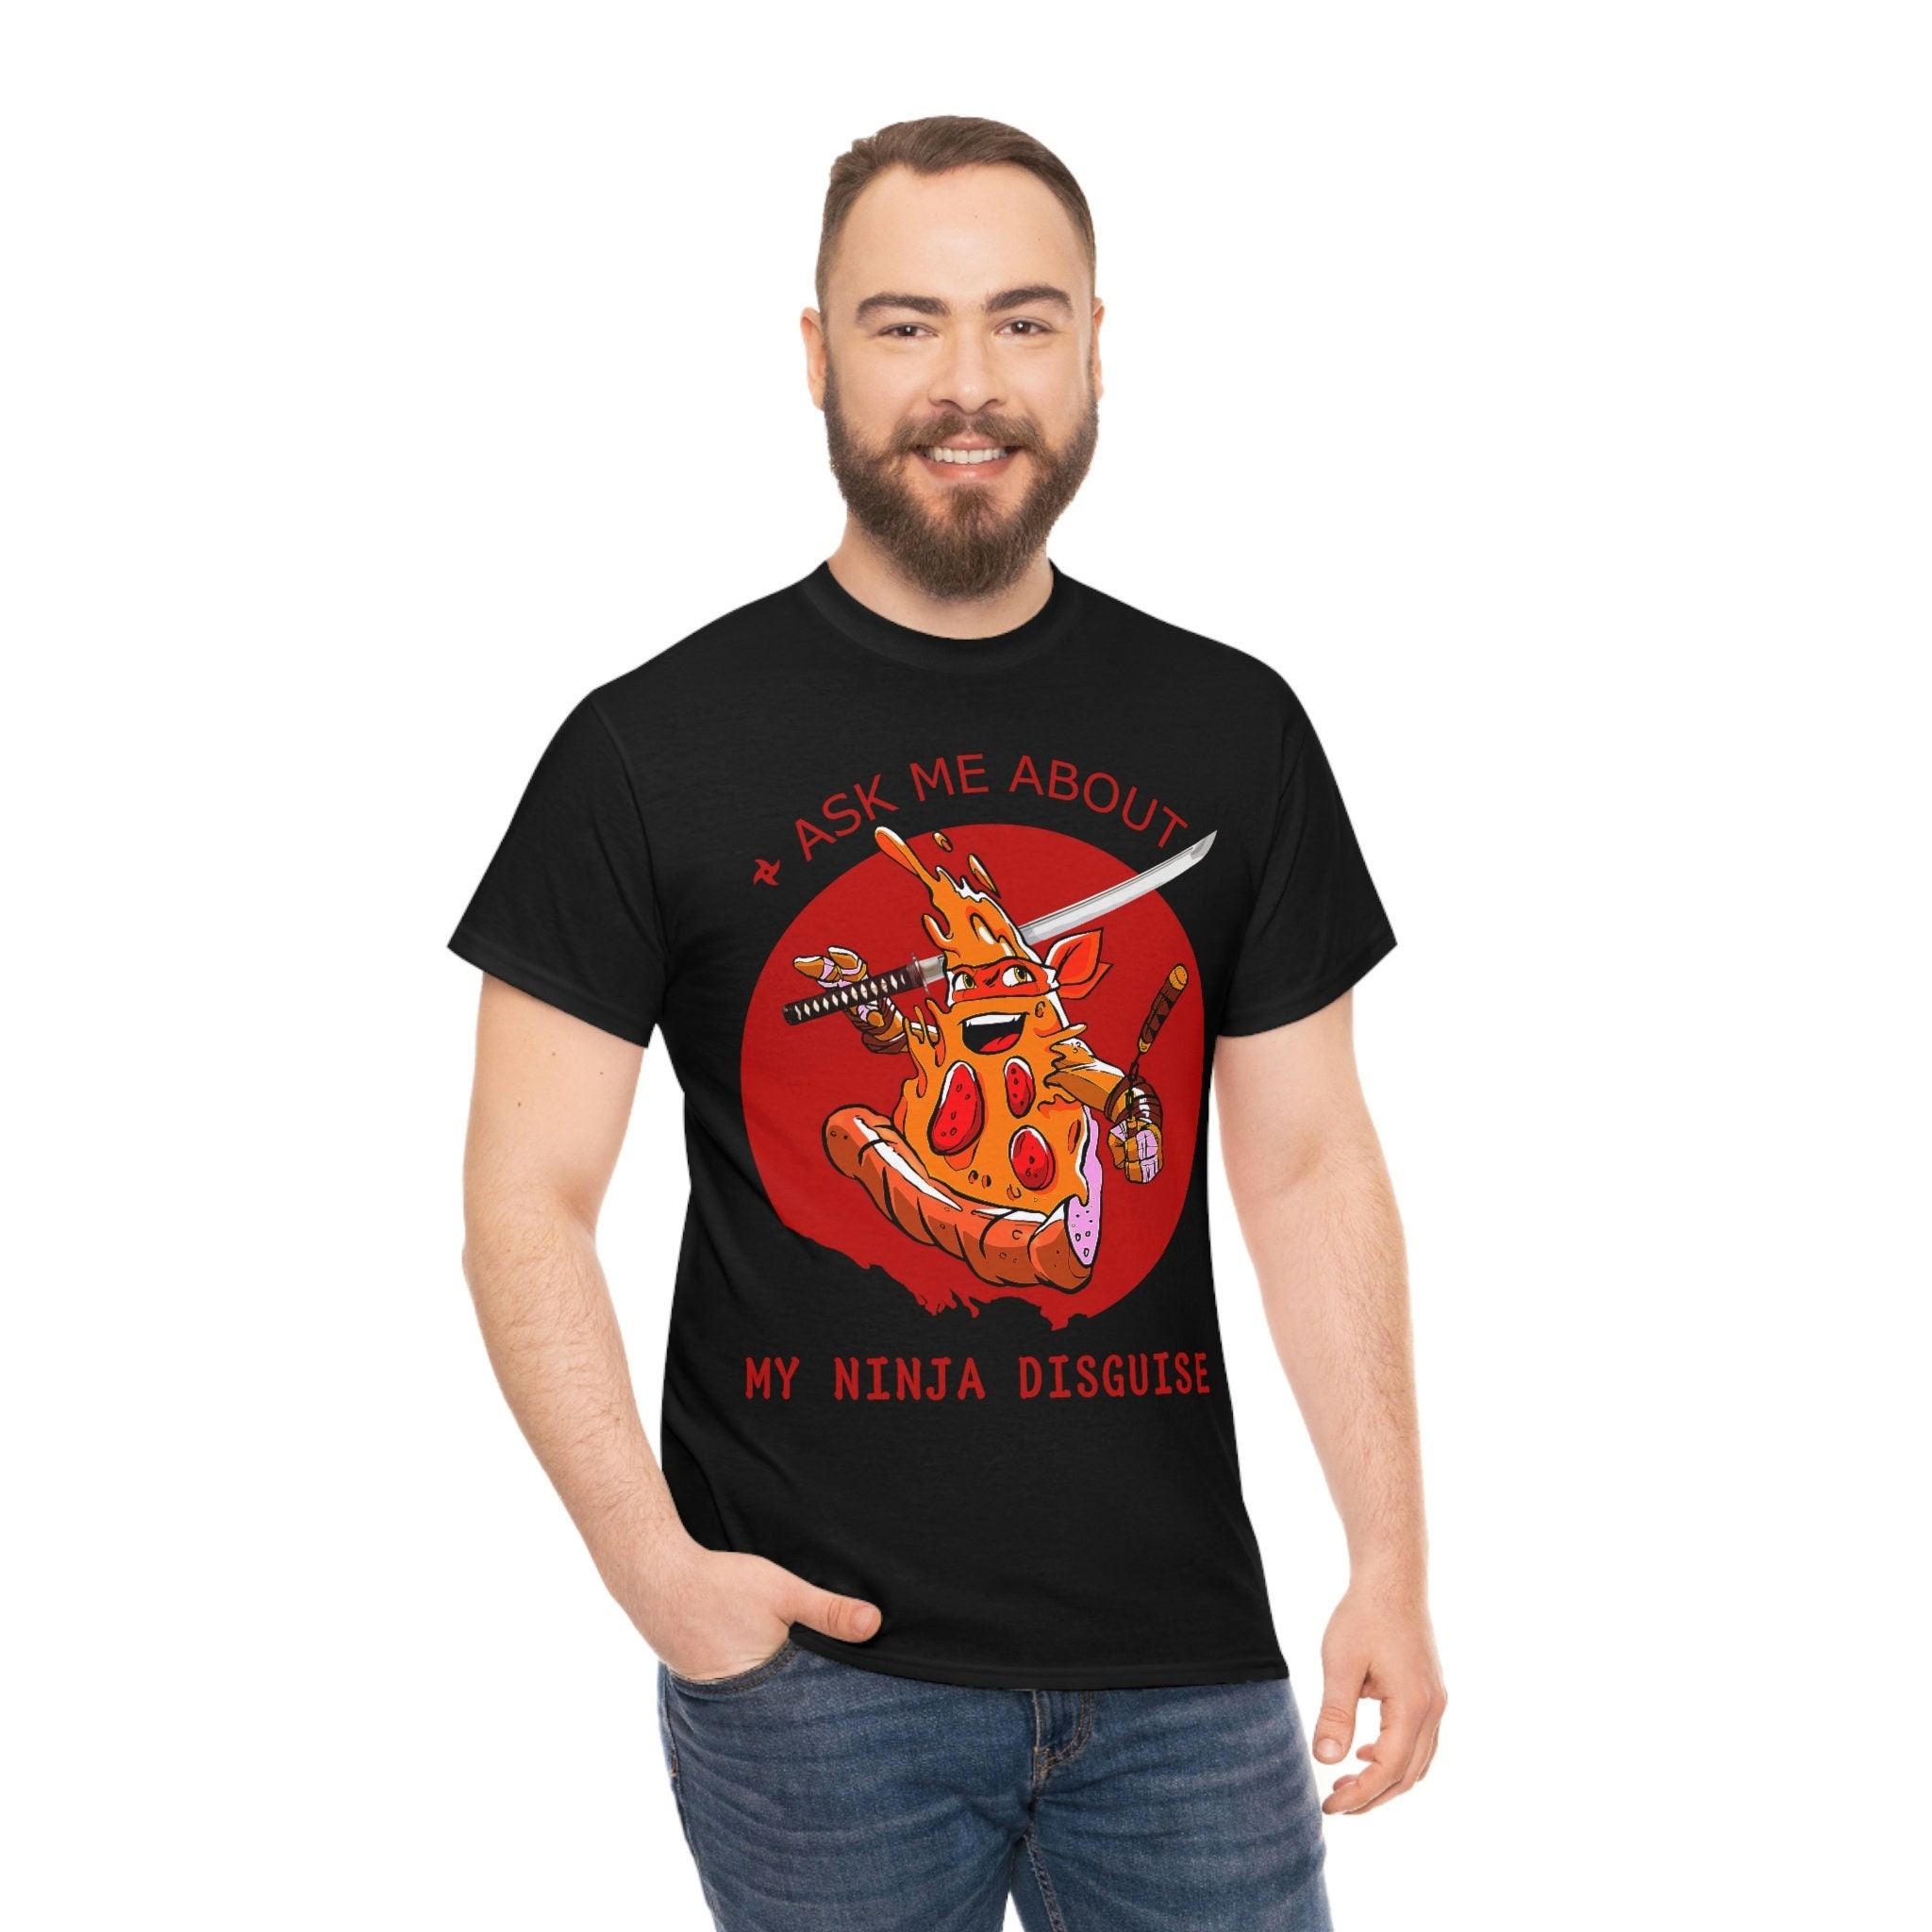 Ask me about my ninja disguise short sleeve t-shirt – ALLRJ